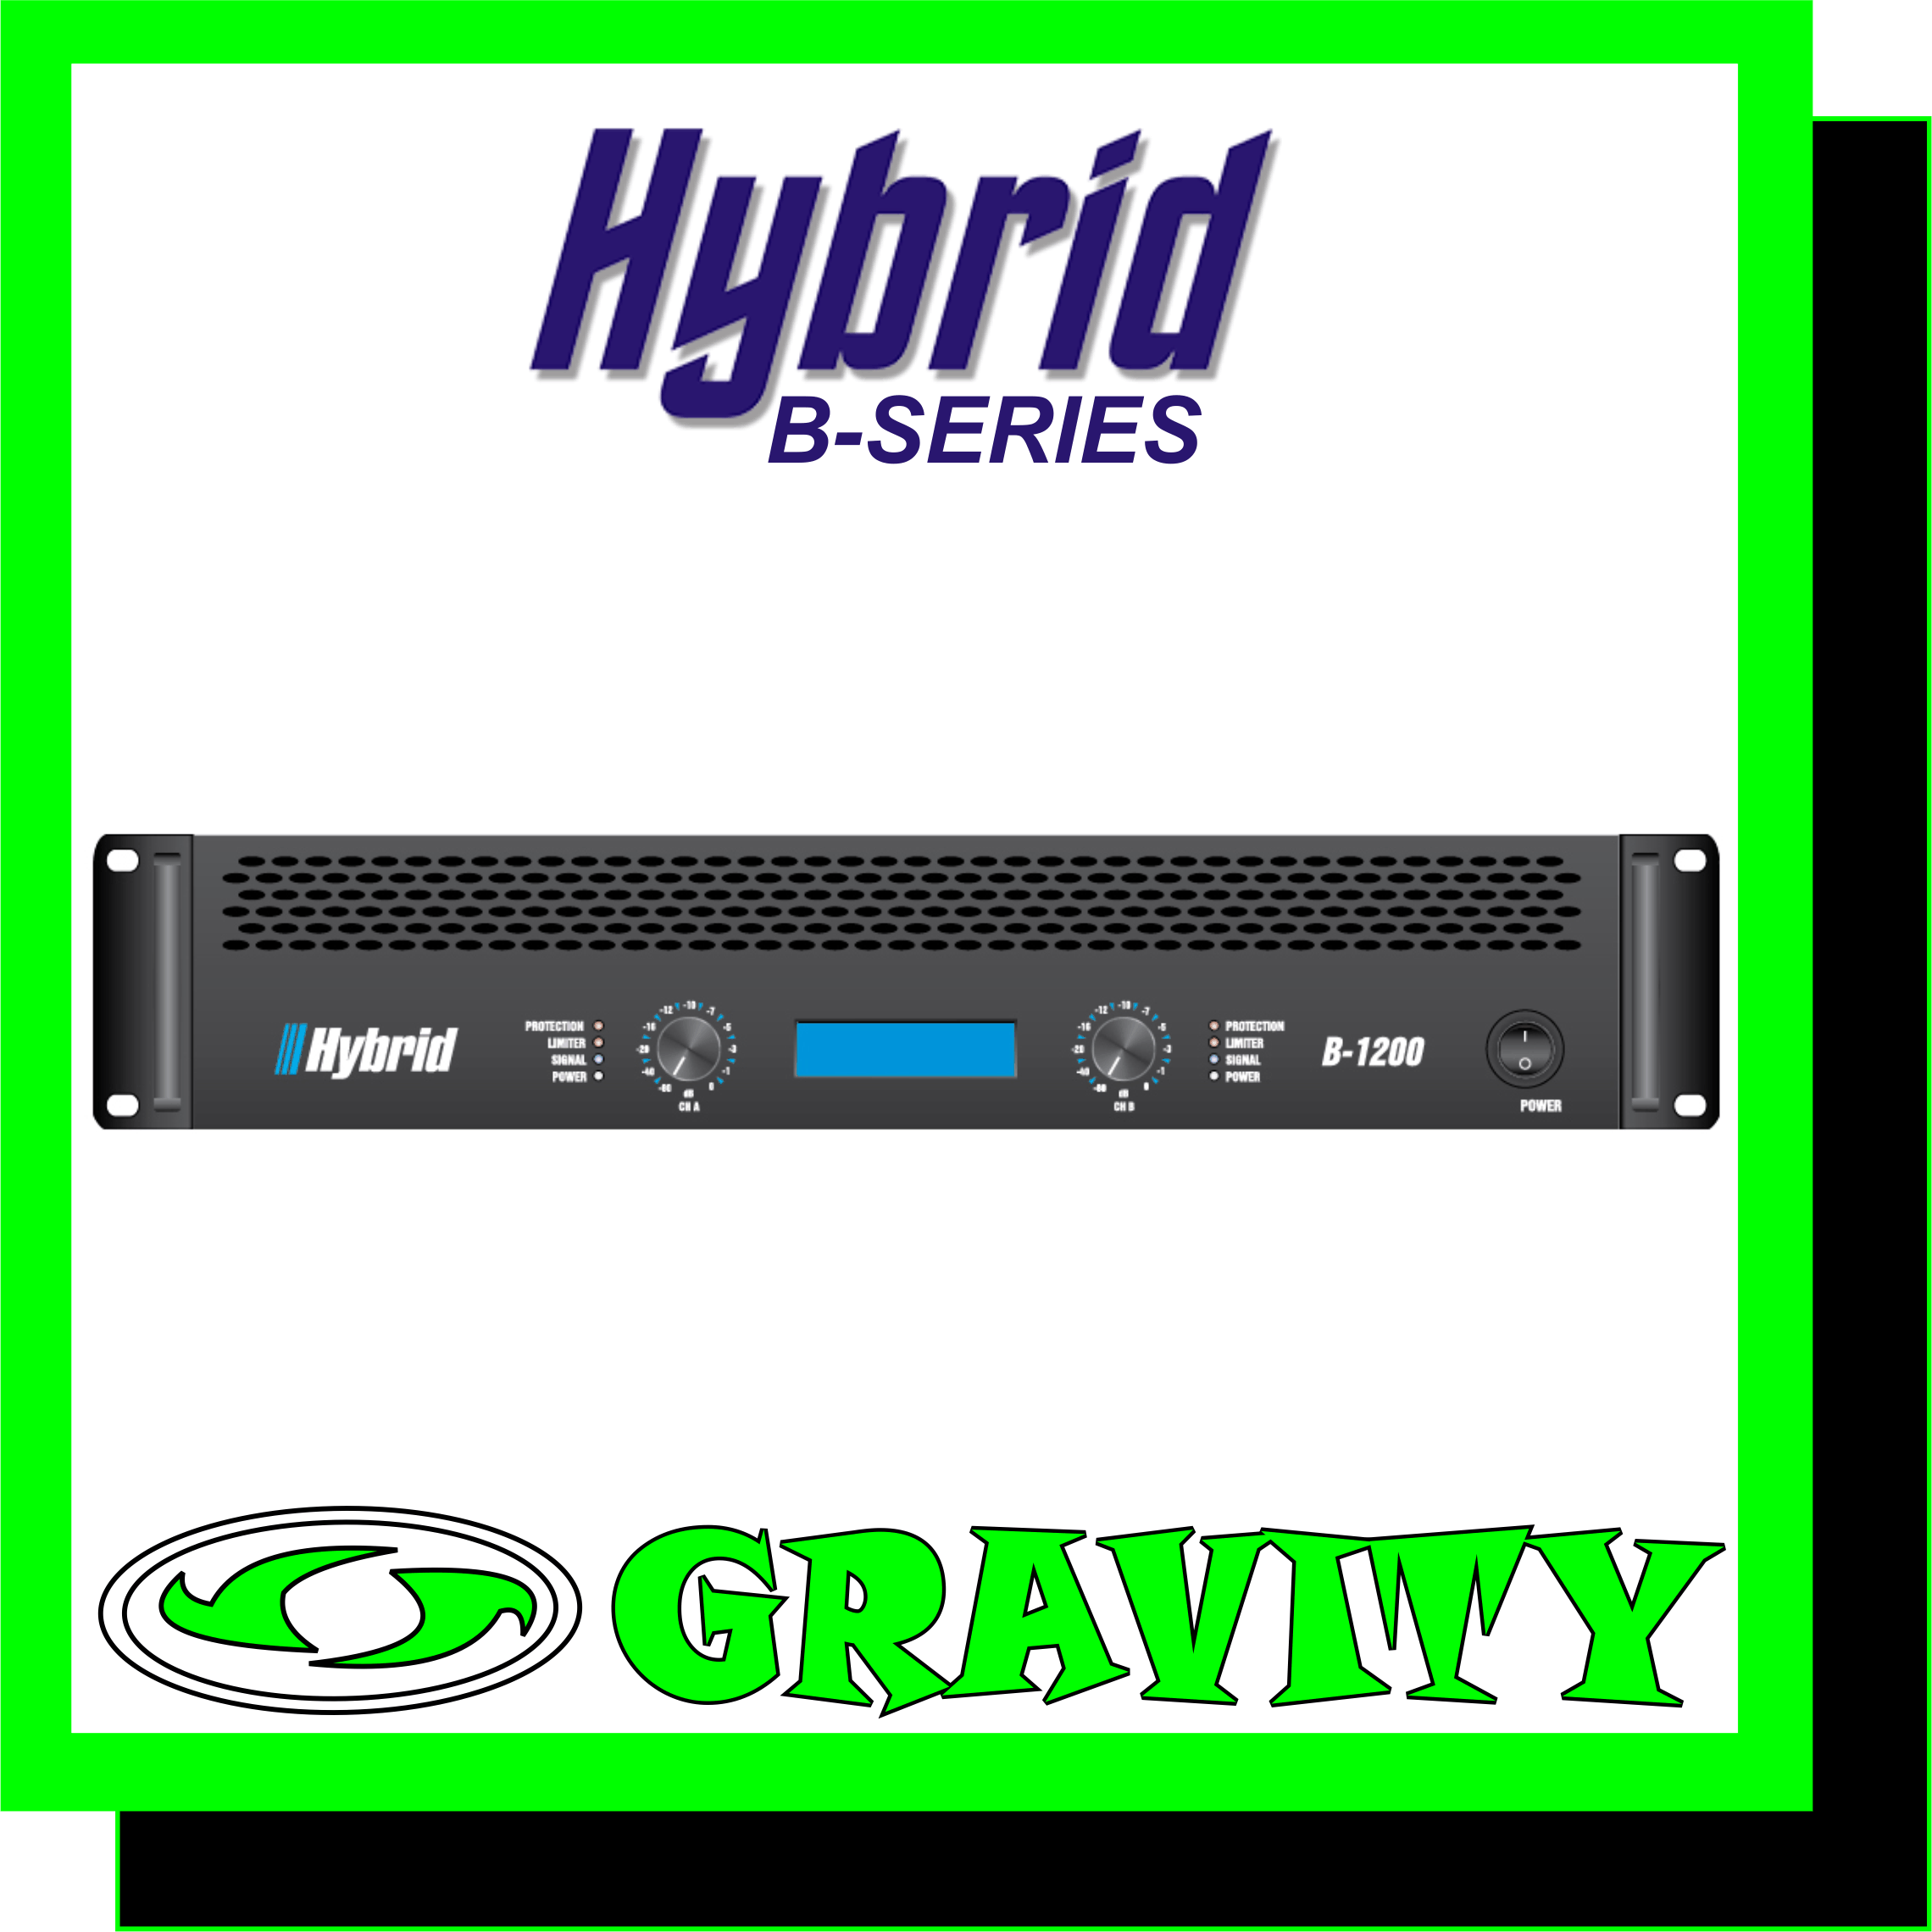 Hybrid B1200MK5 2X600W LCD Display  8Ohm Stereo Power . RMS/CH 385W 4Ohm Stereo Power . RMS/CH 600W 8Ohm Bridged Mono Power . RMS 1140W  Frequency Response ( 1W/8O) 20Hz 20KHz +/- 3dB Protection DC Protection . Short Circuit Protection . Thermal Protection . Inrush Current Protection . Soft Start Portection . Input & Overload Protection THD+N (20Hz-20KHz) <0.1% Damping Factor (1KHz @ 8O) >300 Hum & Noise(A weighted . -80dBW) 95dB Input Impedance (Balanced / Unbalanced) 20K Ohm / 10K Ohm Crosstalk (20Hz-20KHz Rated Power 8O) >60dB Cooling 2 x Fans . Dual speed . Front to Rear Airflow  Input Connectors Jack/Female XLR Neutrik Combo + Male XLR Neutrik Output Connectors 3x Neutrik Speakon Dimensions (WxHxD) mm 483 x 88 x 430 Weight Kg 17.5